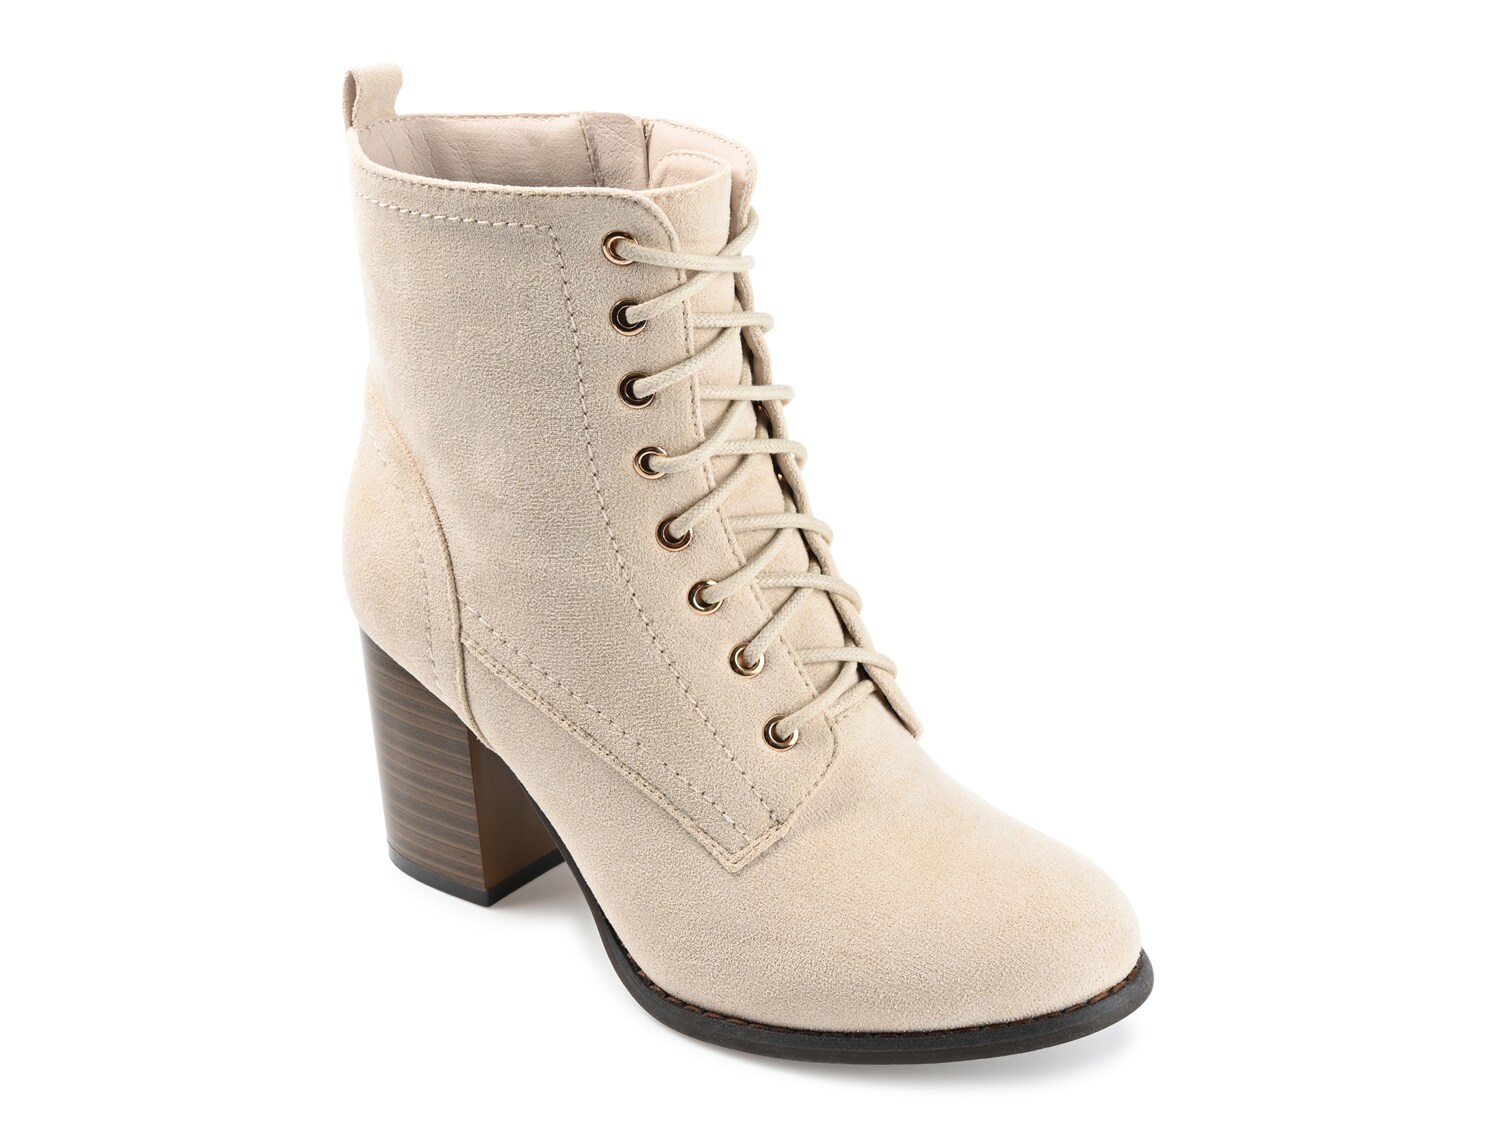 Journee Collection Baylor Bootie - Free Shipping | DSW